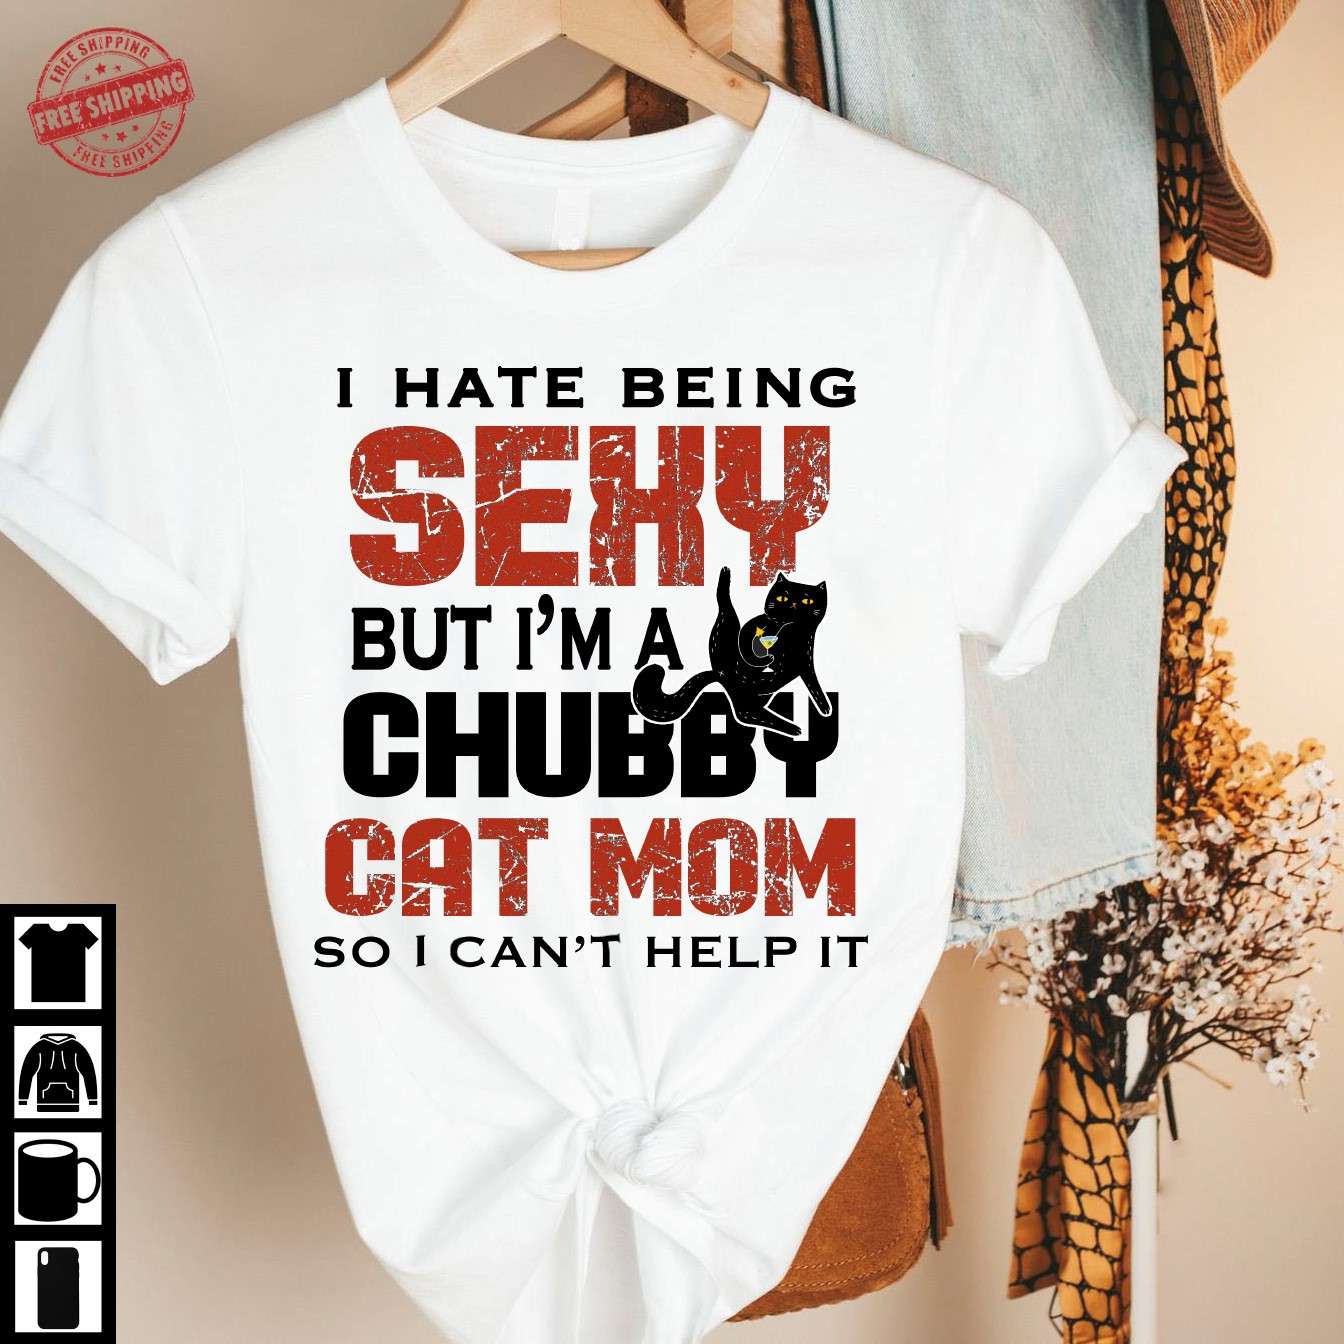 I hate being sexy but I'm a chubby cat mom so I can't help it - Mother loves cat